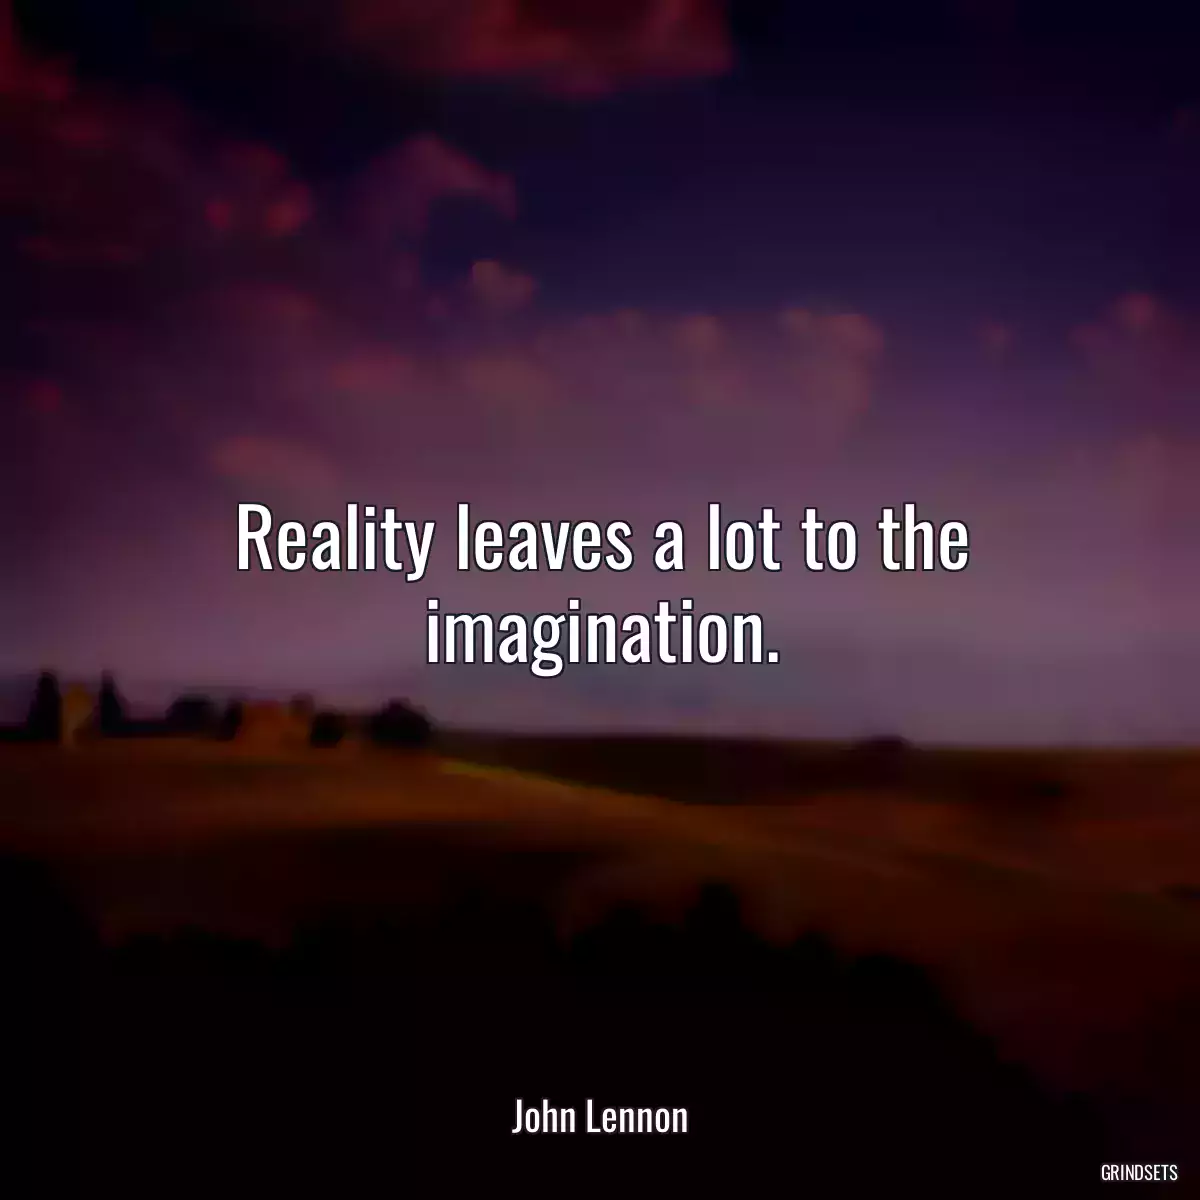 Reality leaves a lot to the imagination.